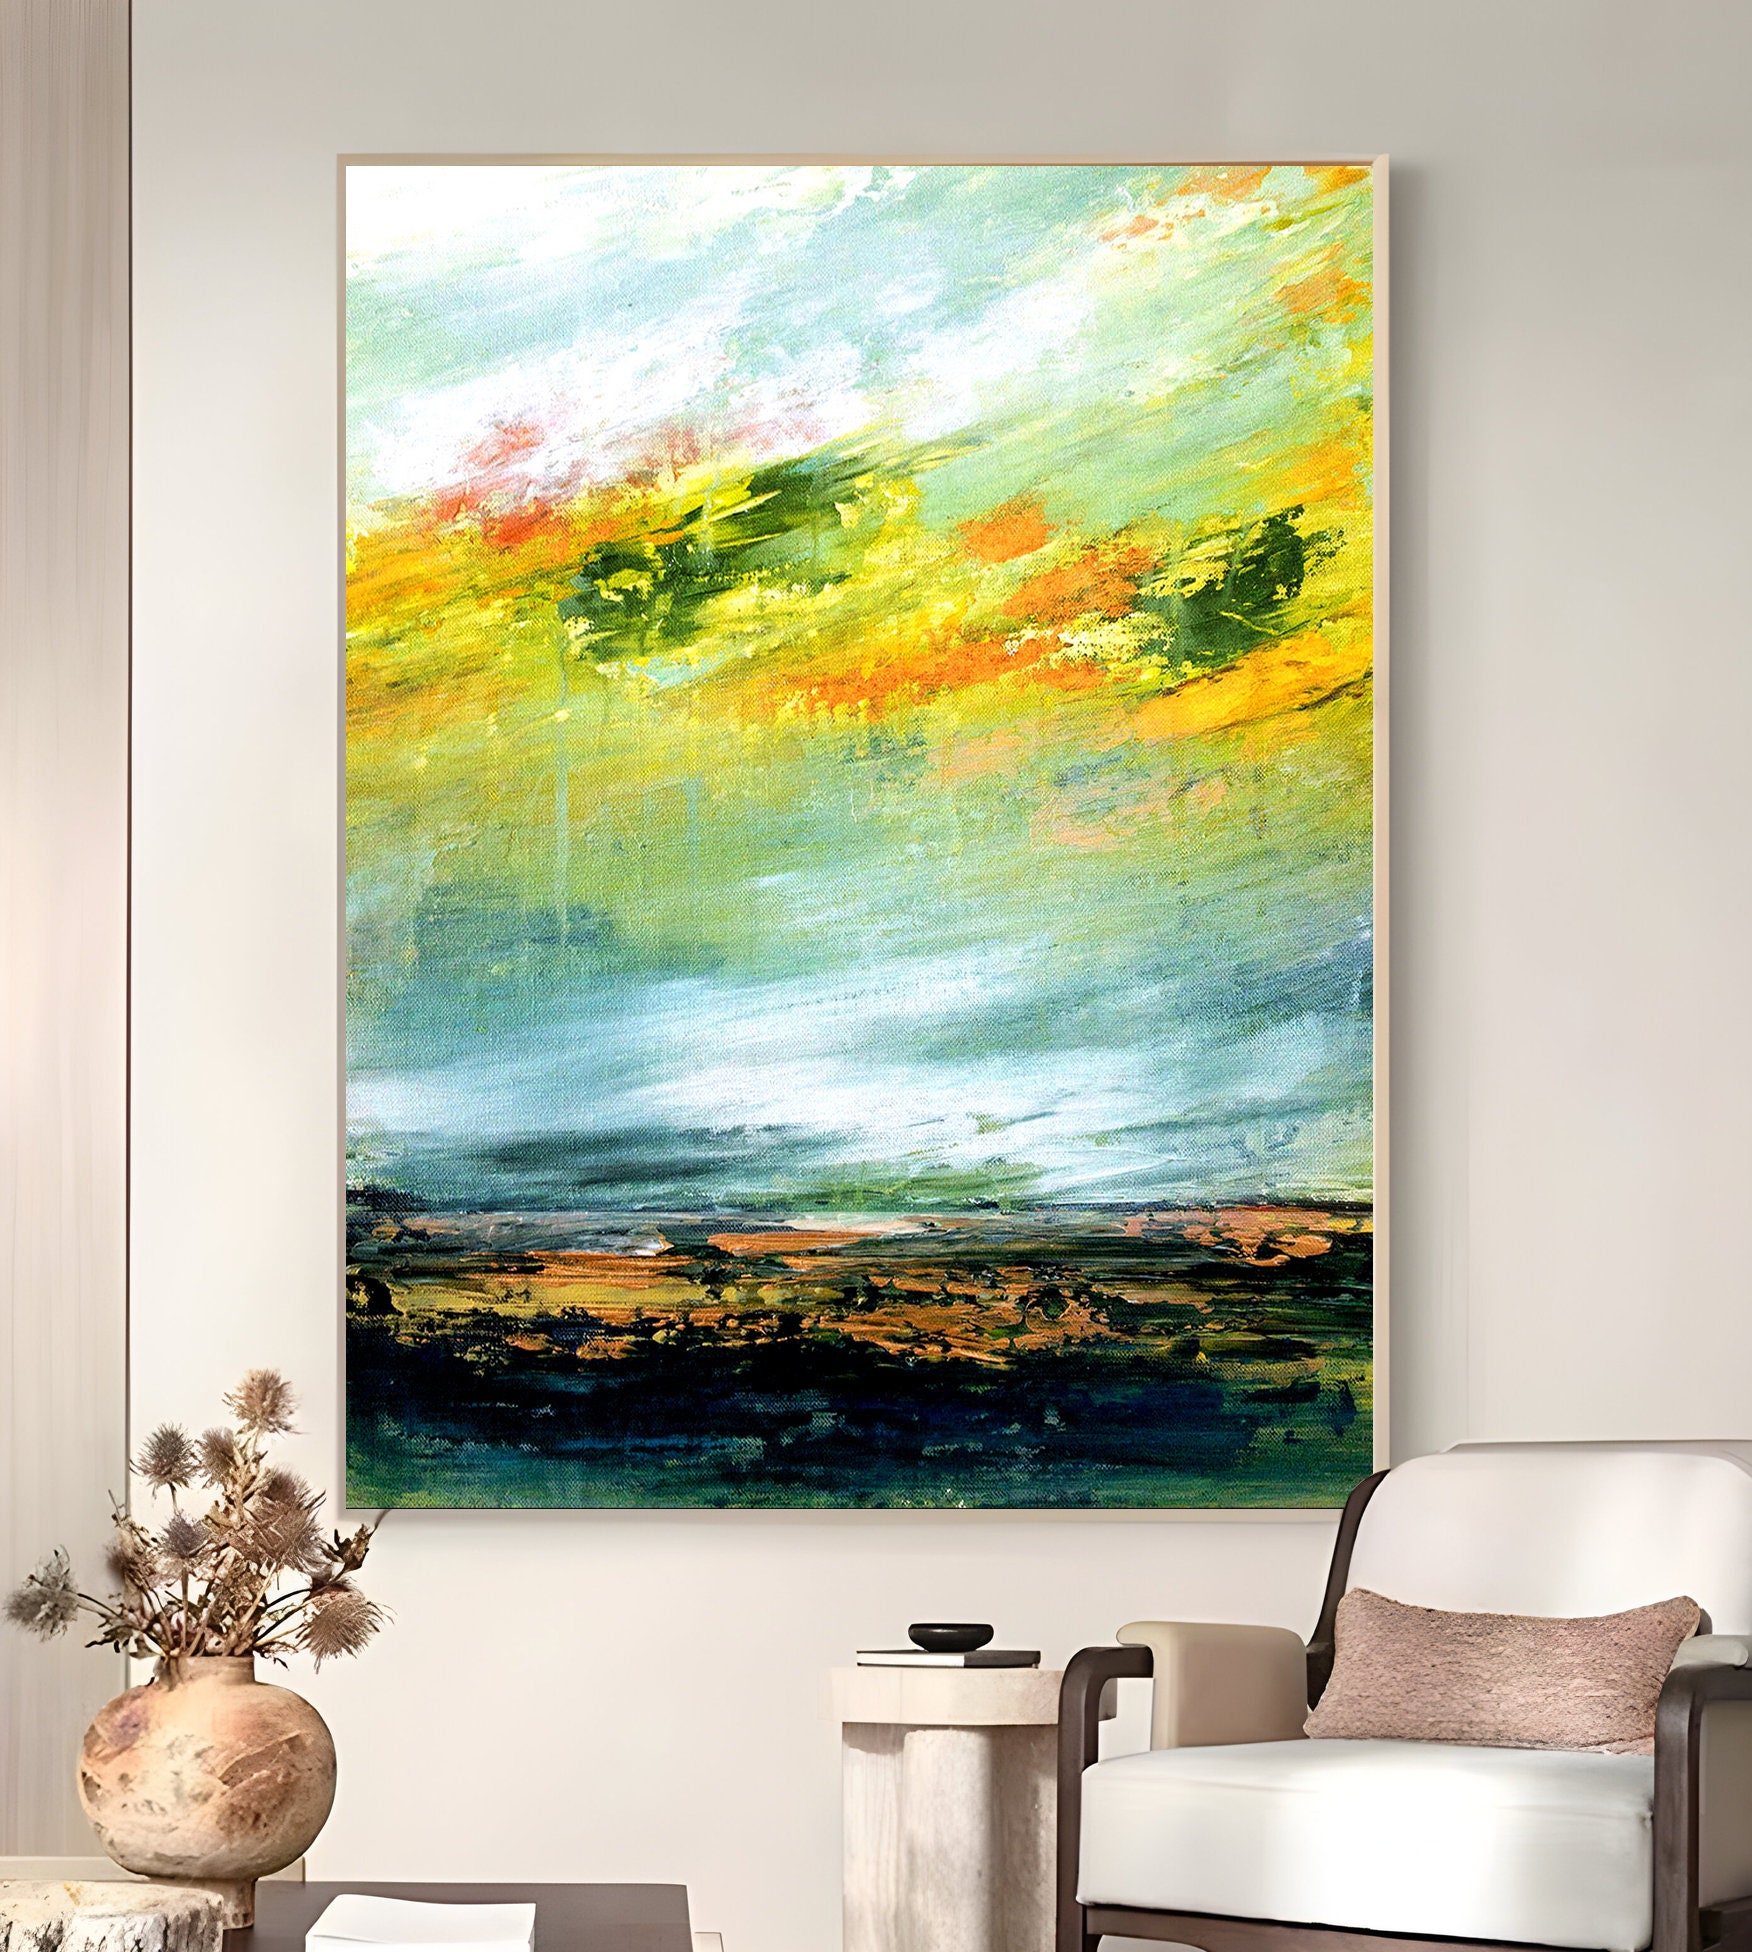 Acrylic Painting, Oil Large Painting, Canvas Painting, Original Abstract,  Wall art decor, Abstract canvases, Art Canvas Oil, Oil Large Art [pat132] -  $197.00 : Handmade Large Abstract Painting On Canvas